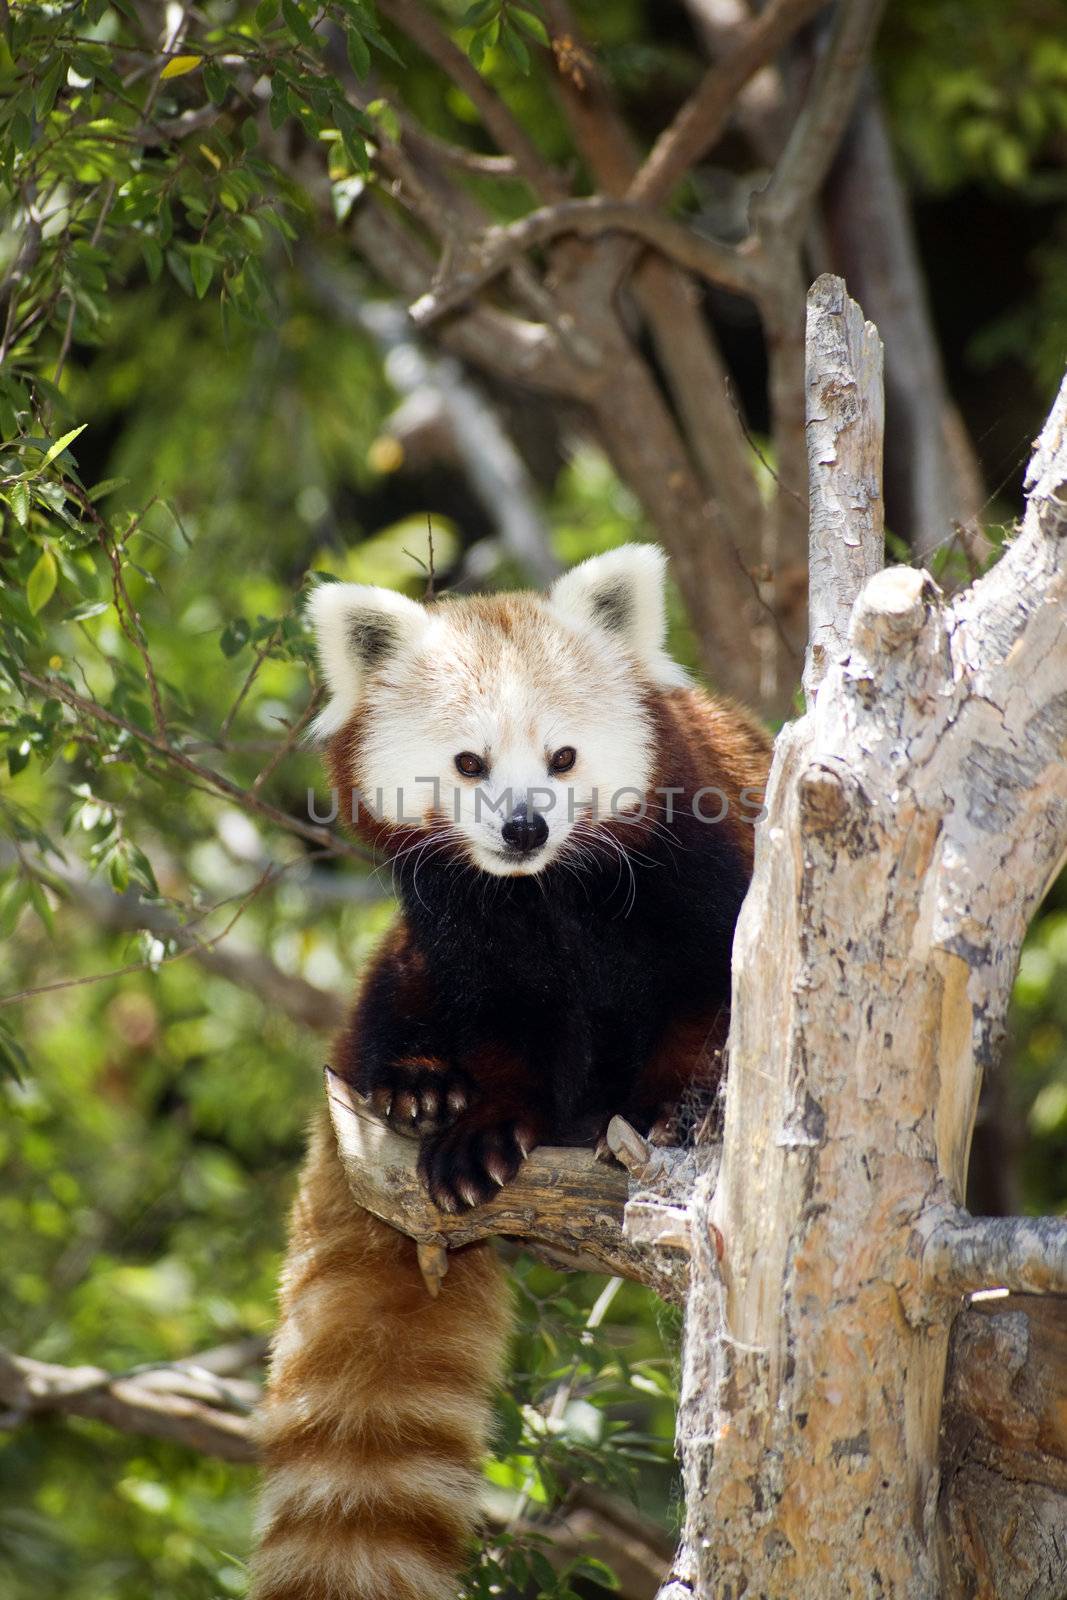 A red panda takes a break from lunch to check the surroundings